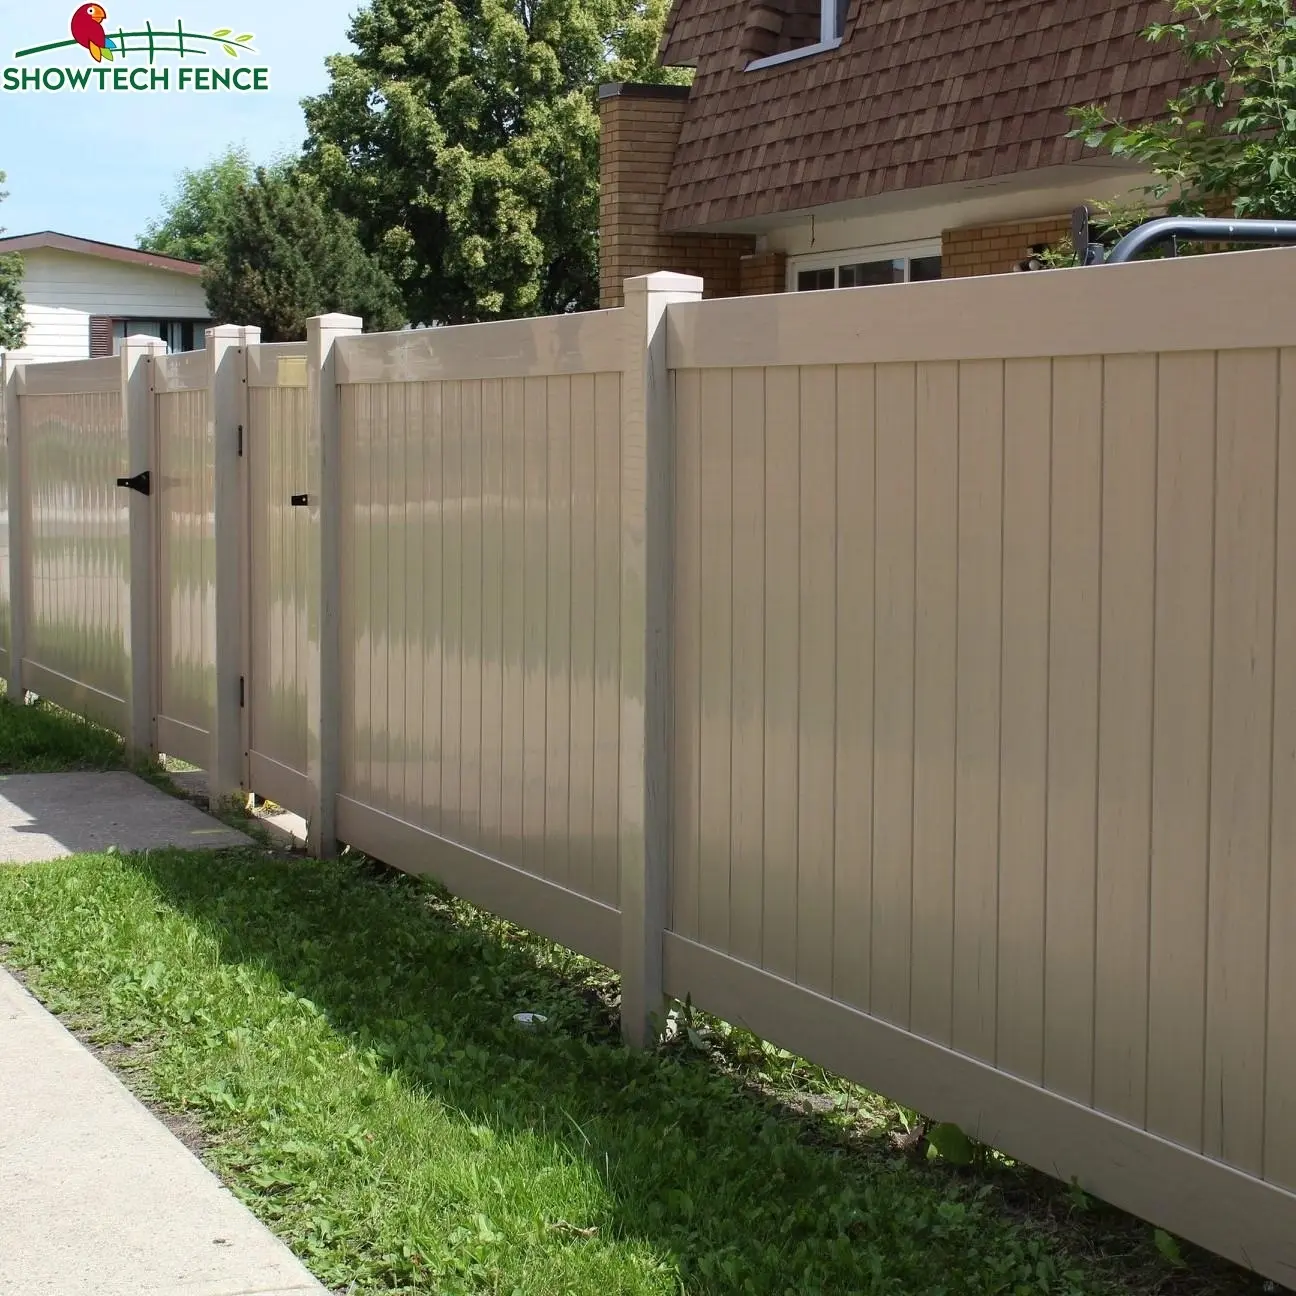 vinyl private fence 7 feet tall, vinyl privacy fence 8x6, vinyl fence accessories